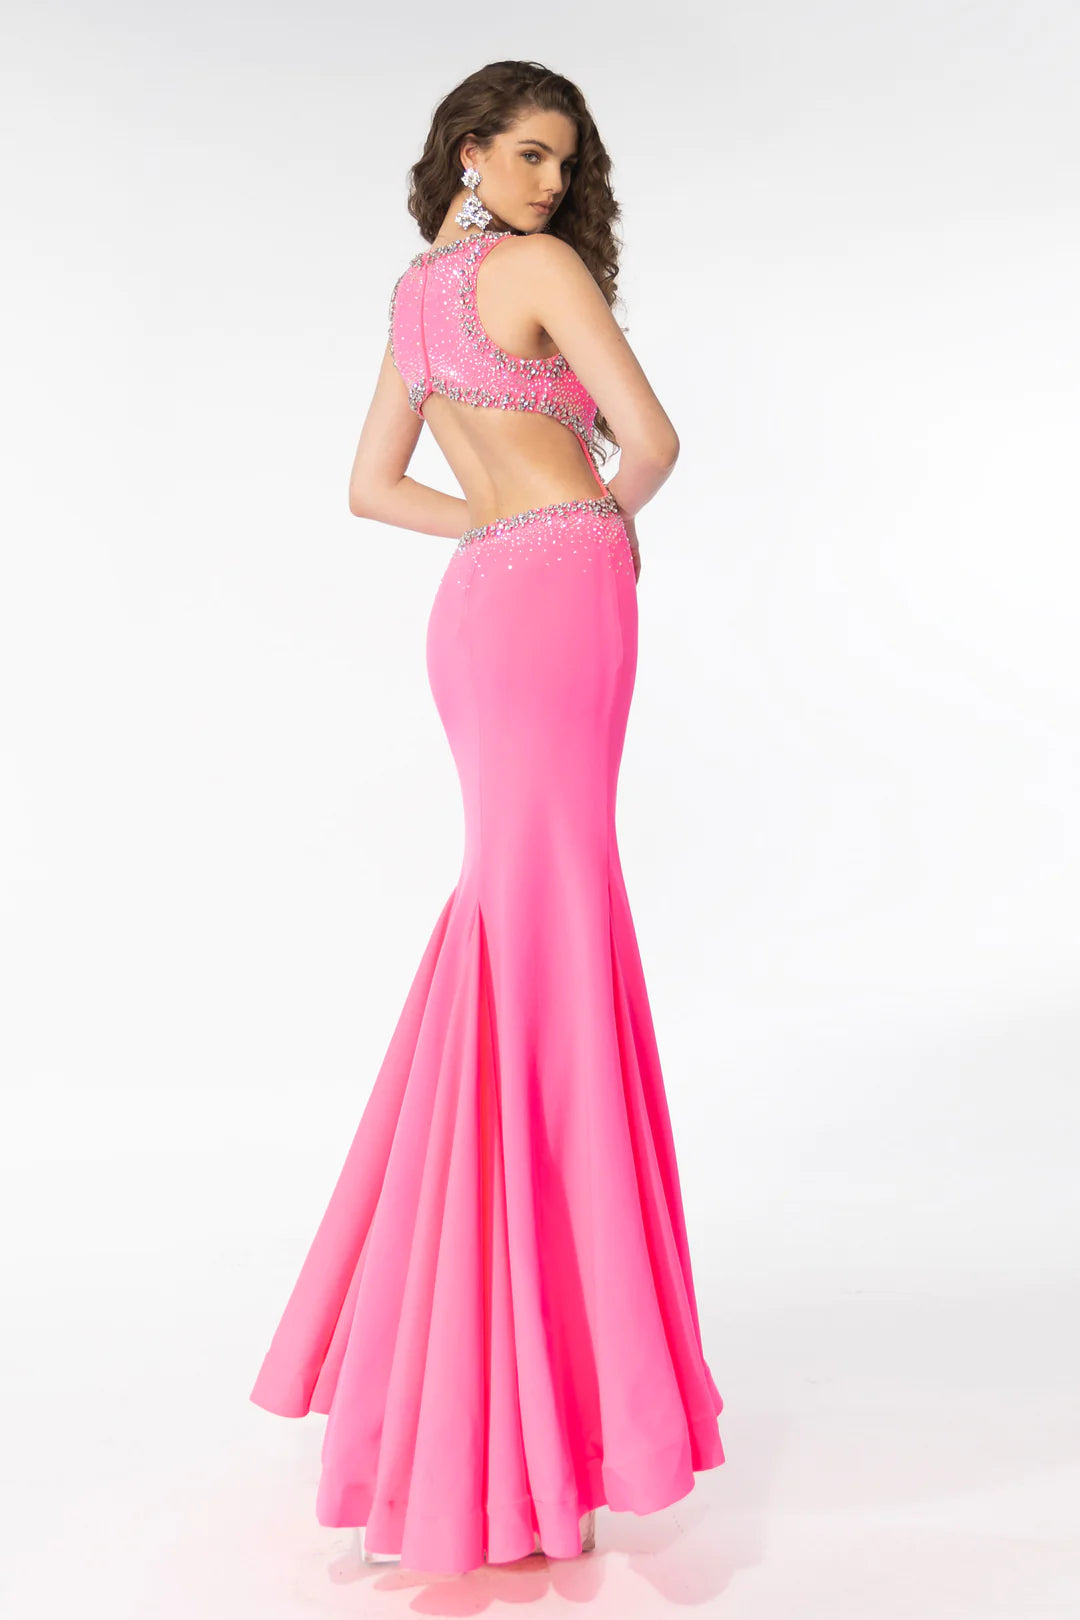 Elevate your prom look with the Ava Presley 39237 Long Prom Dress. The open back, cut out design, and high slit adds a touch of drama while the beaded detailing gives it a glamorous touch. Perfect for formal events and pageants.